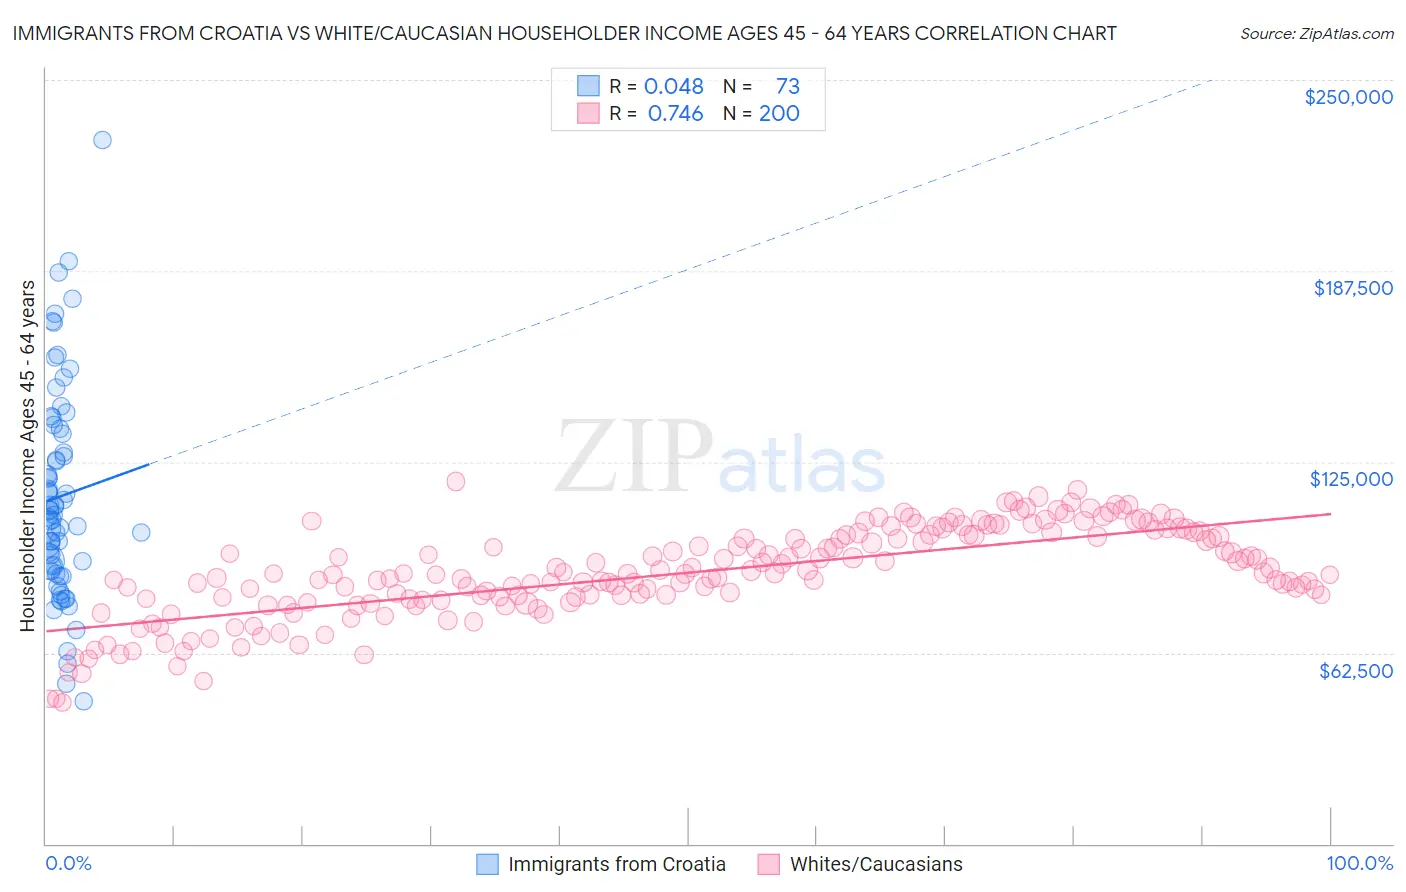 Immigrants from Croatia vs White/Caucasian Householder Income Ages 45 - 64 years